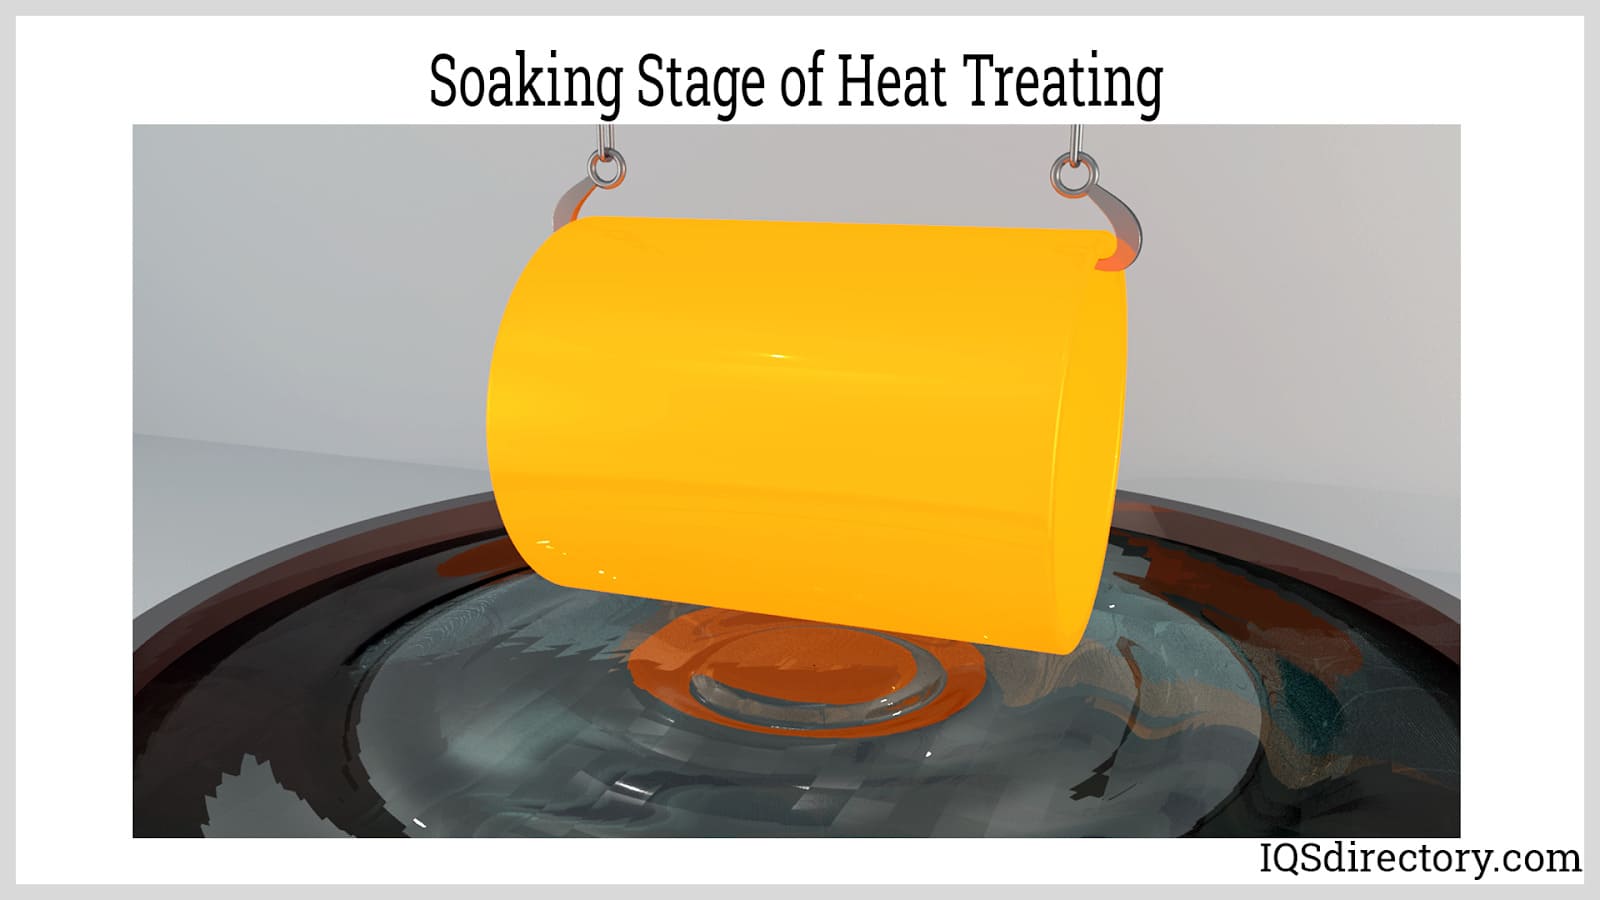 Soaking Stage of Heat Treating